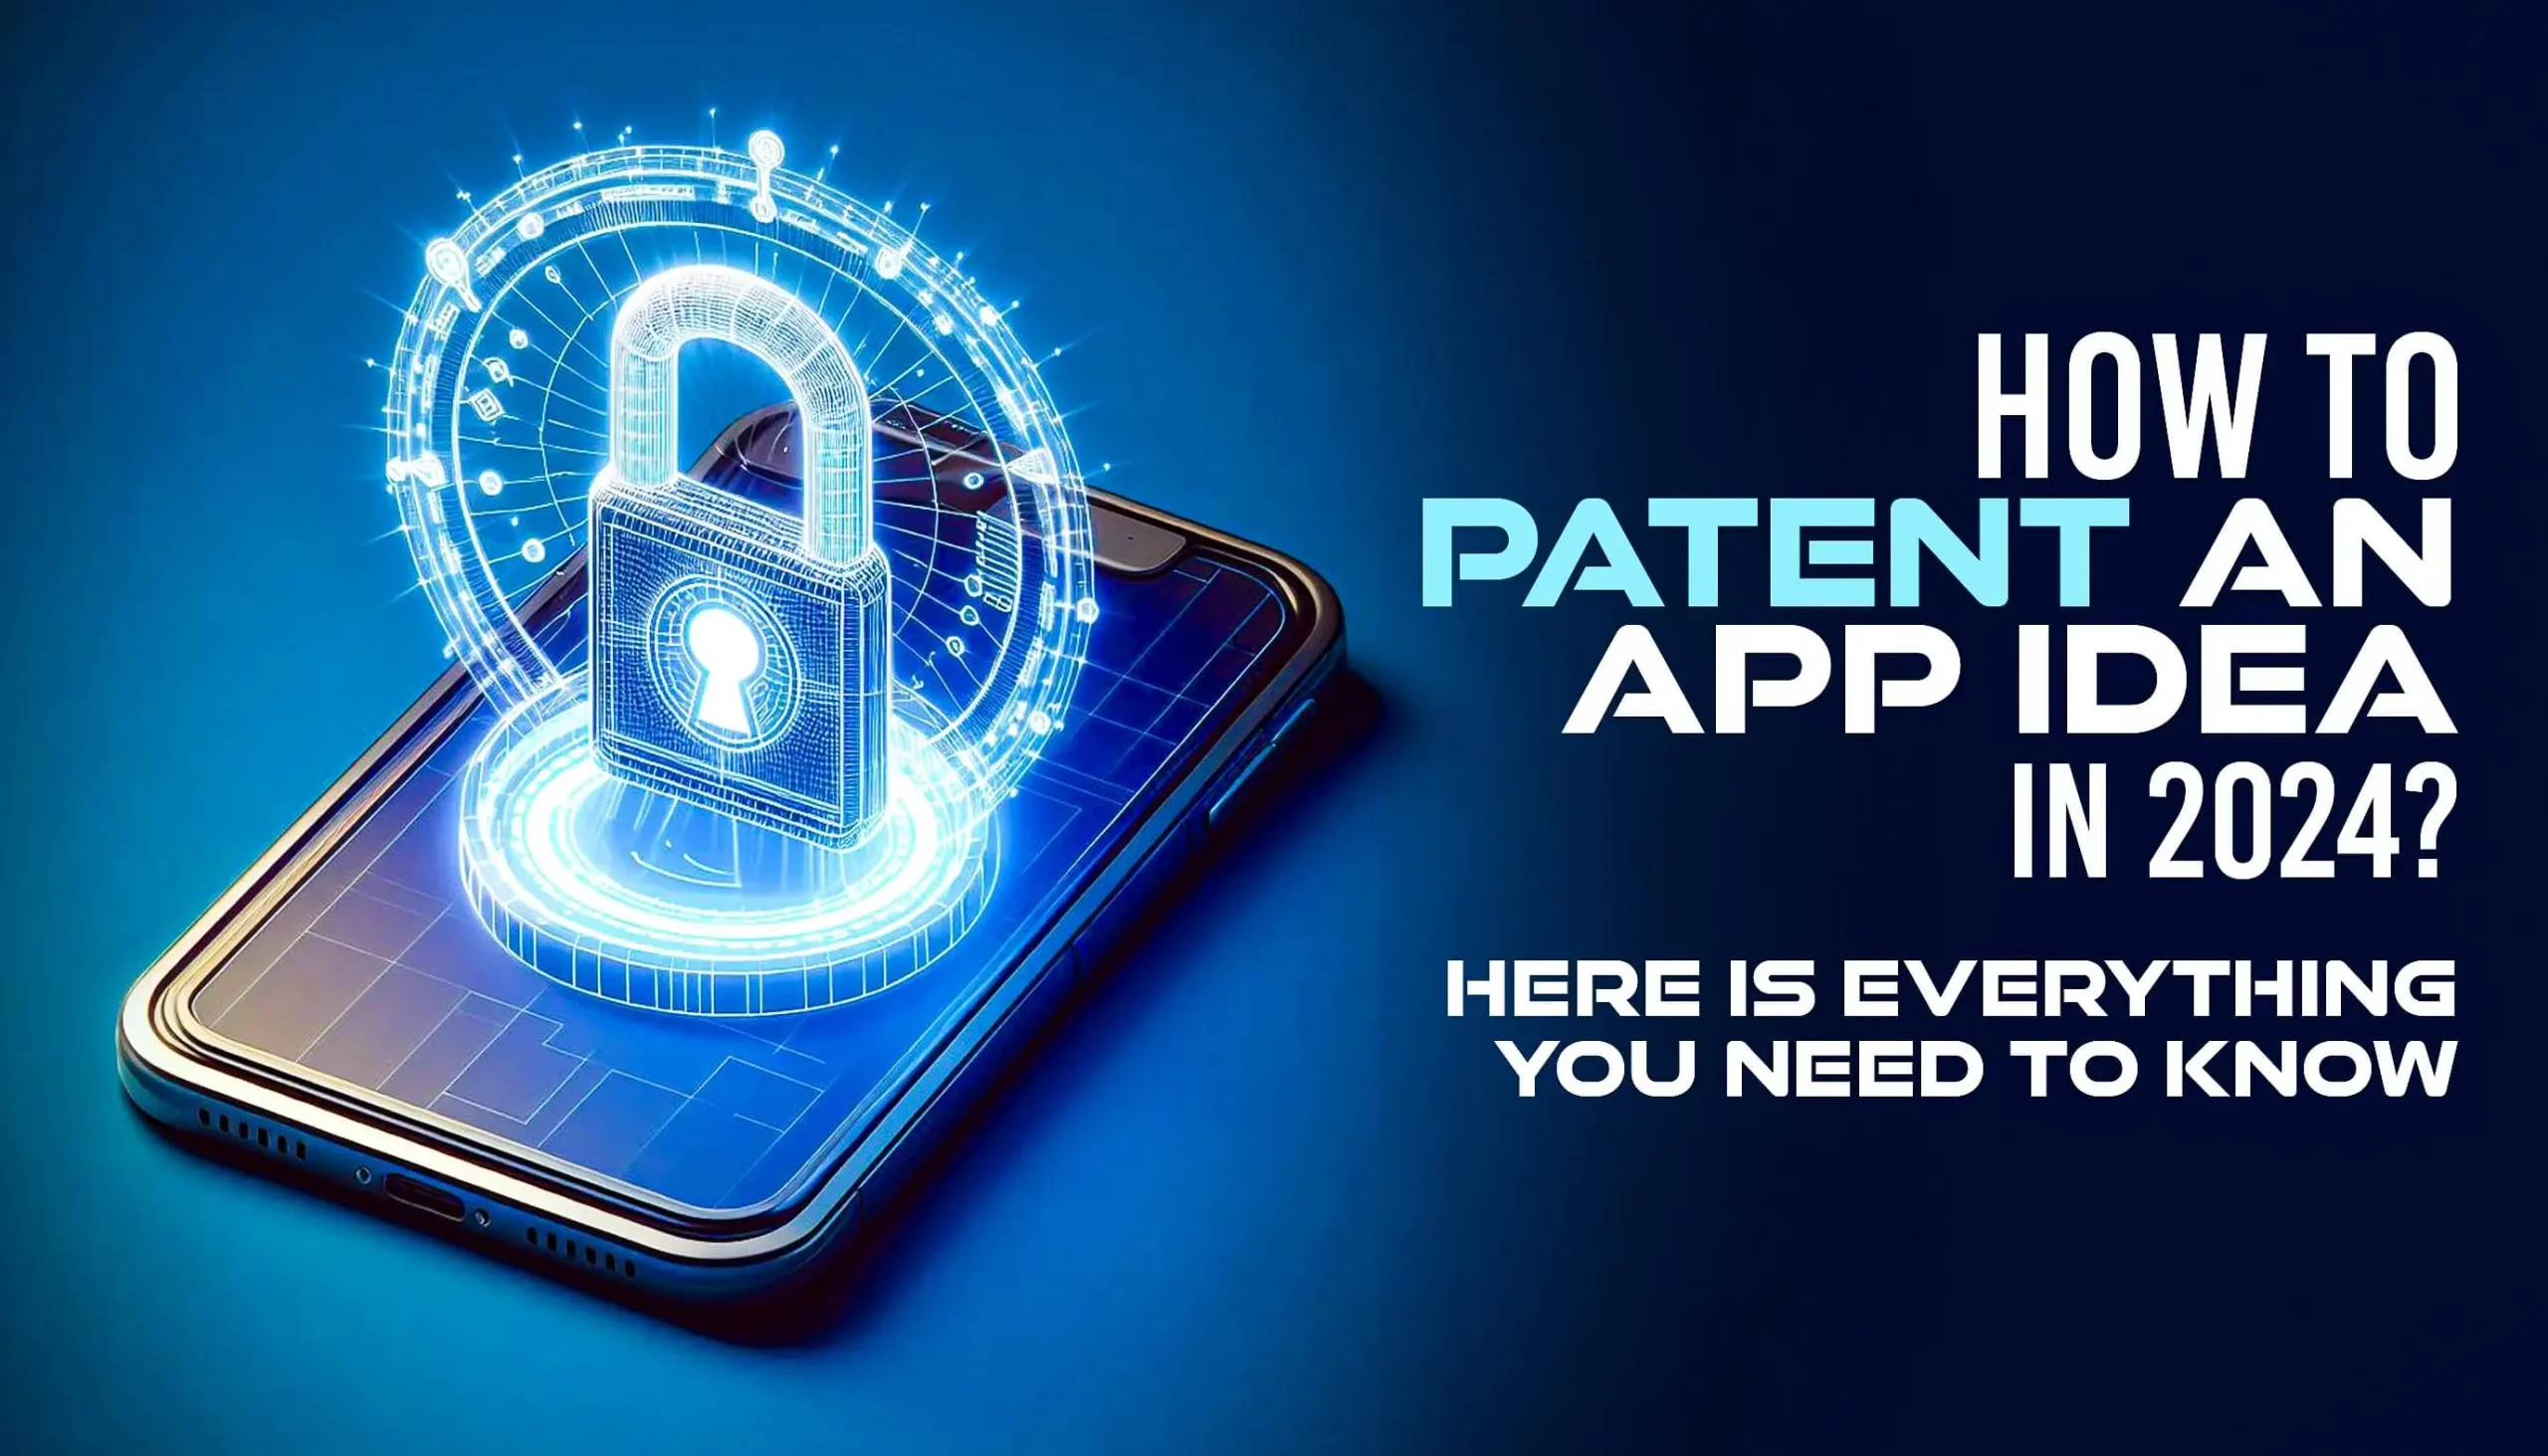 How to Patent an App Idea